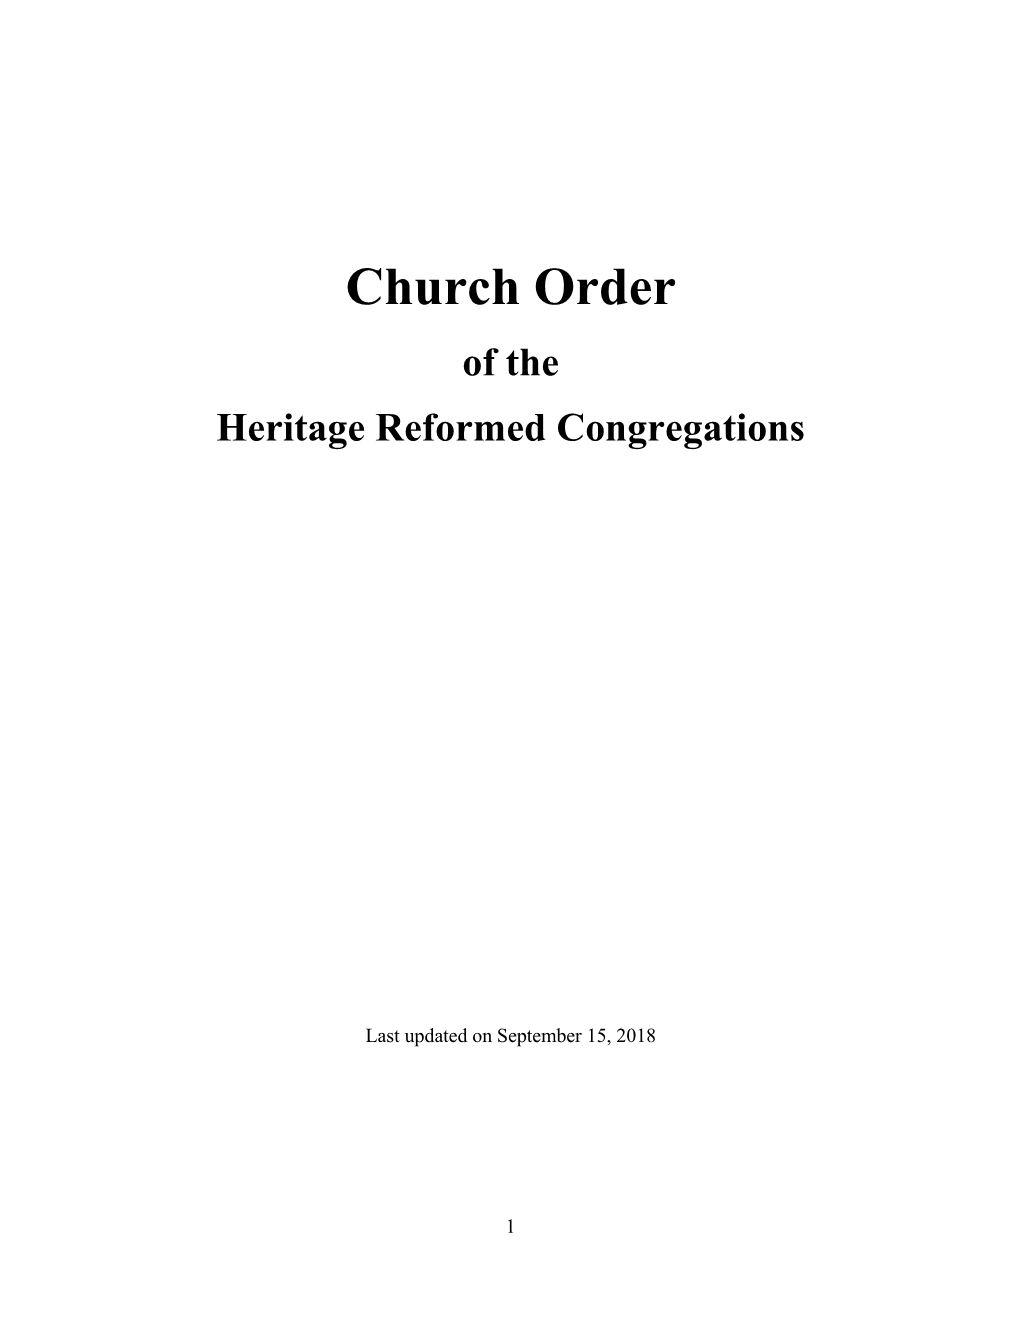 Church Order of The